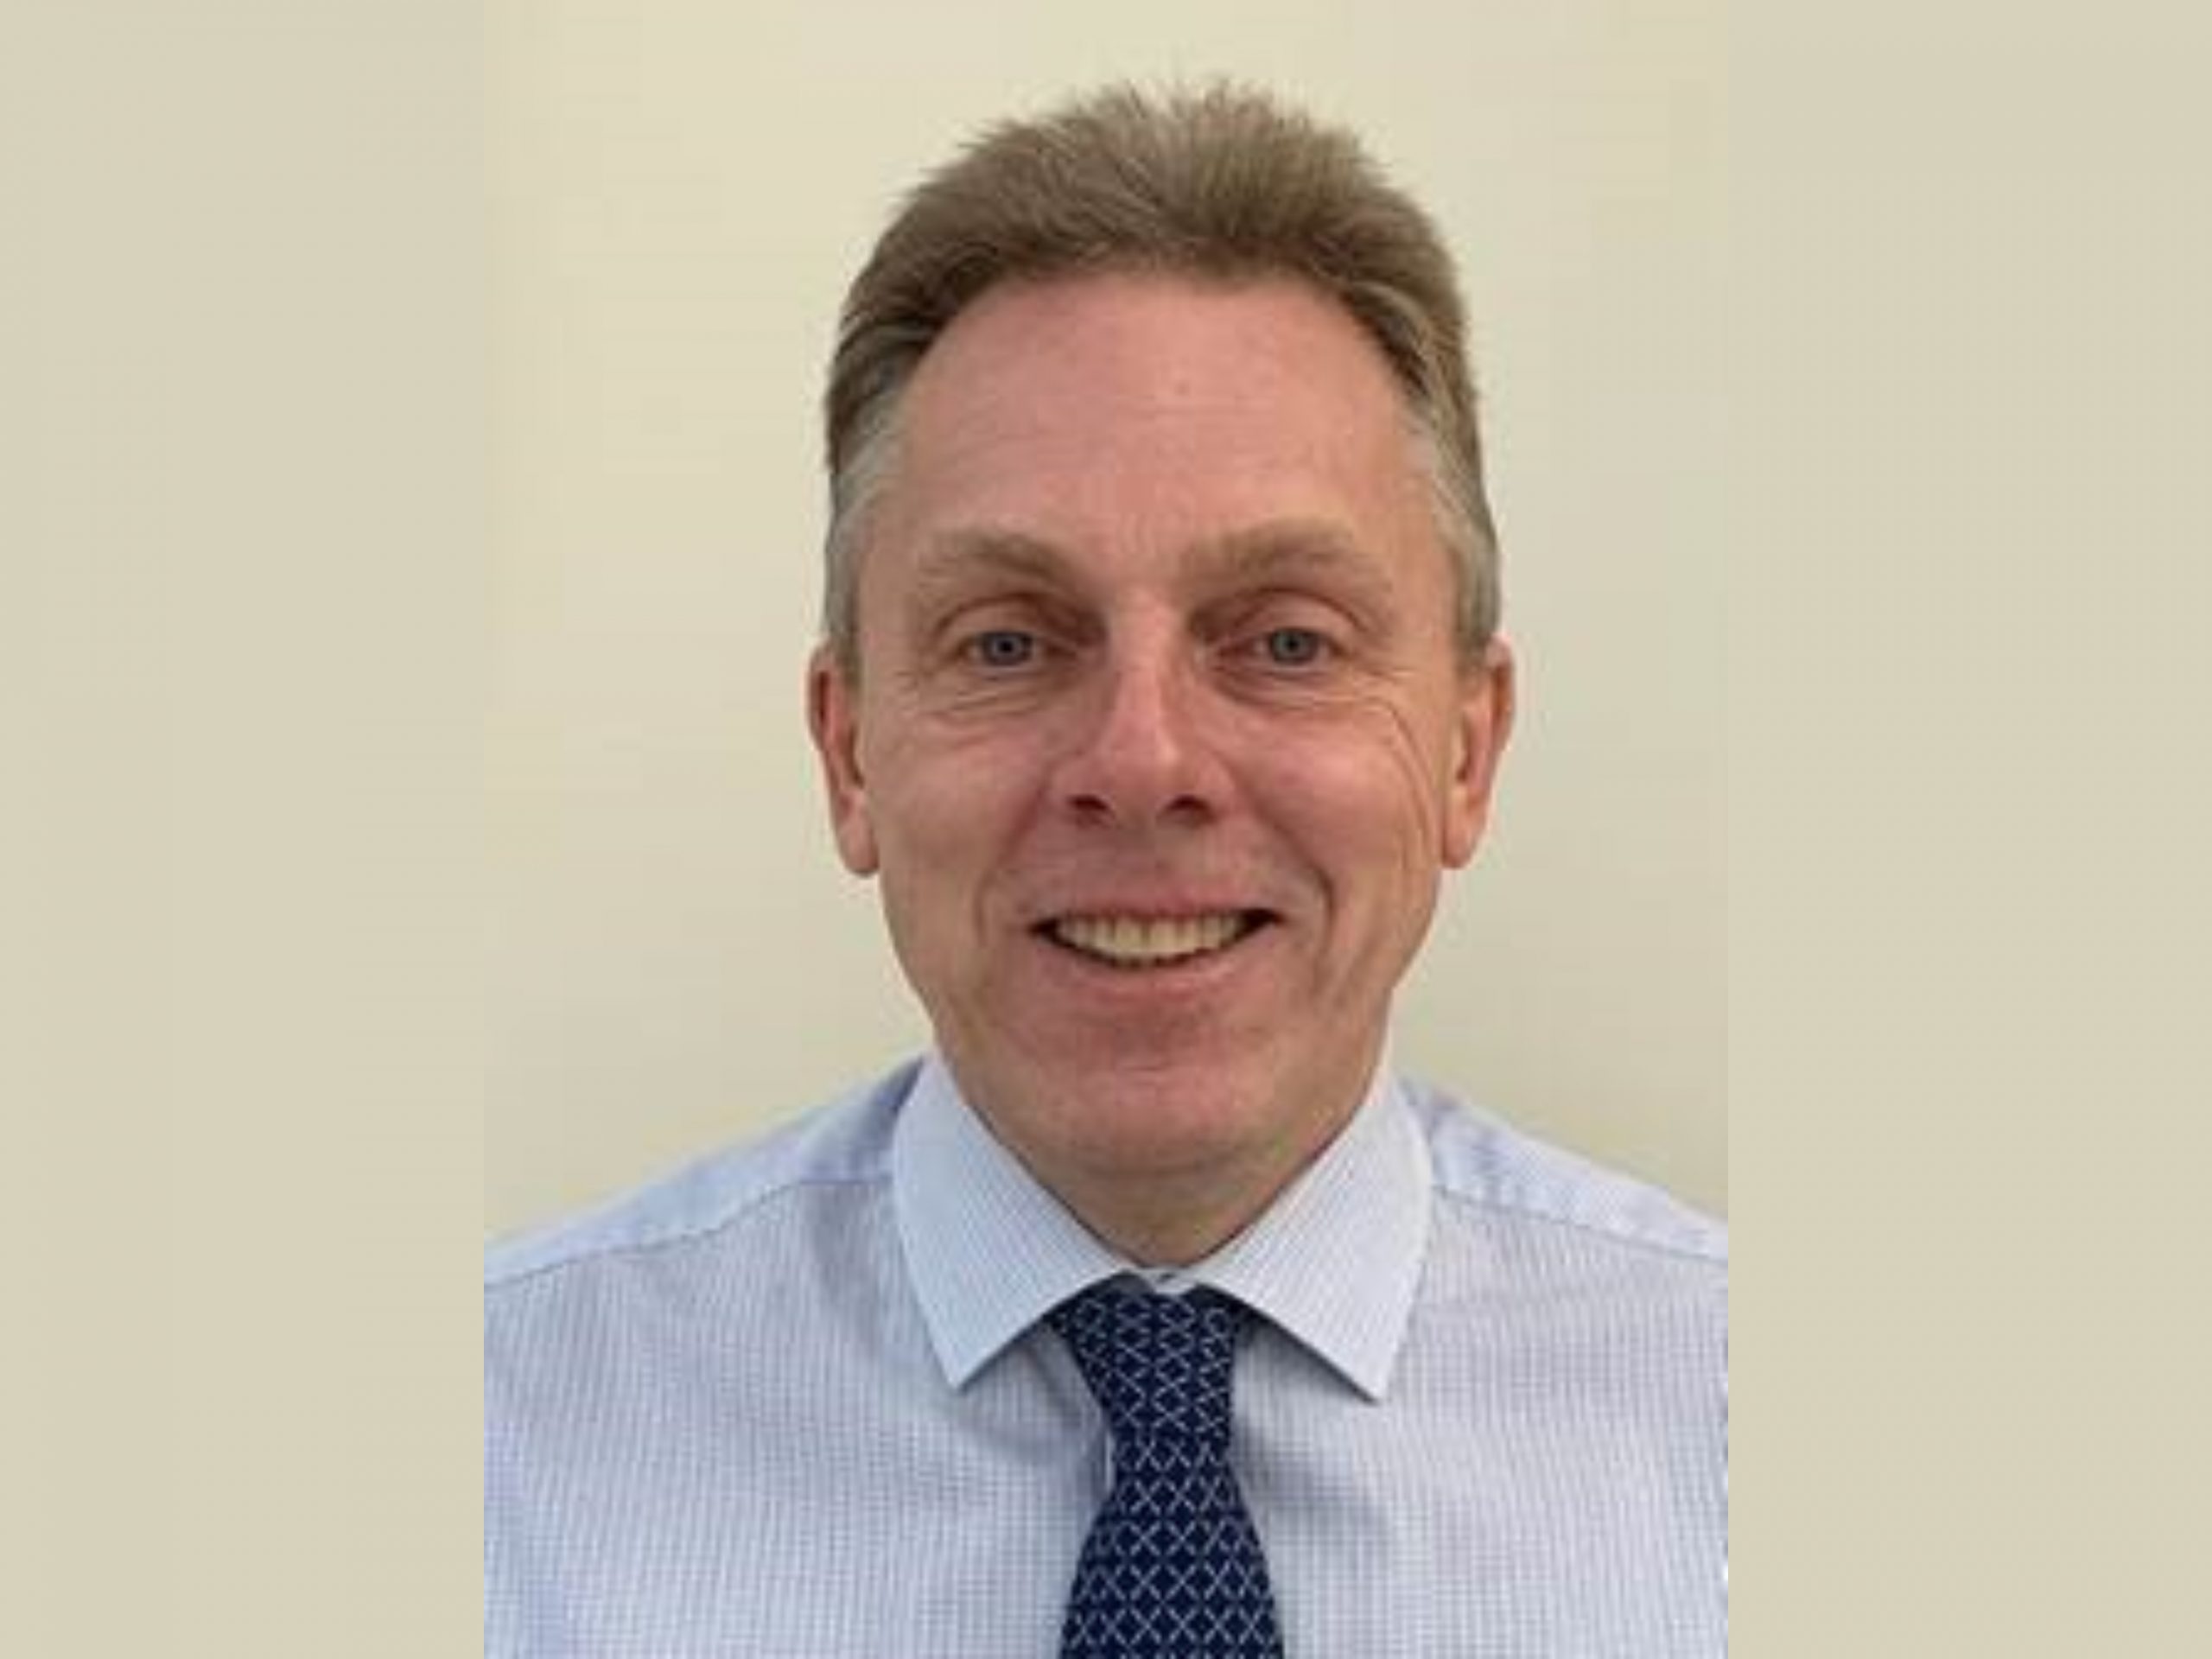 Care & Independence Managing Director Ian Jones Appointed to BHTA Board of Directors